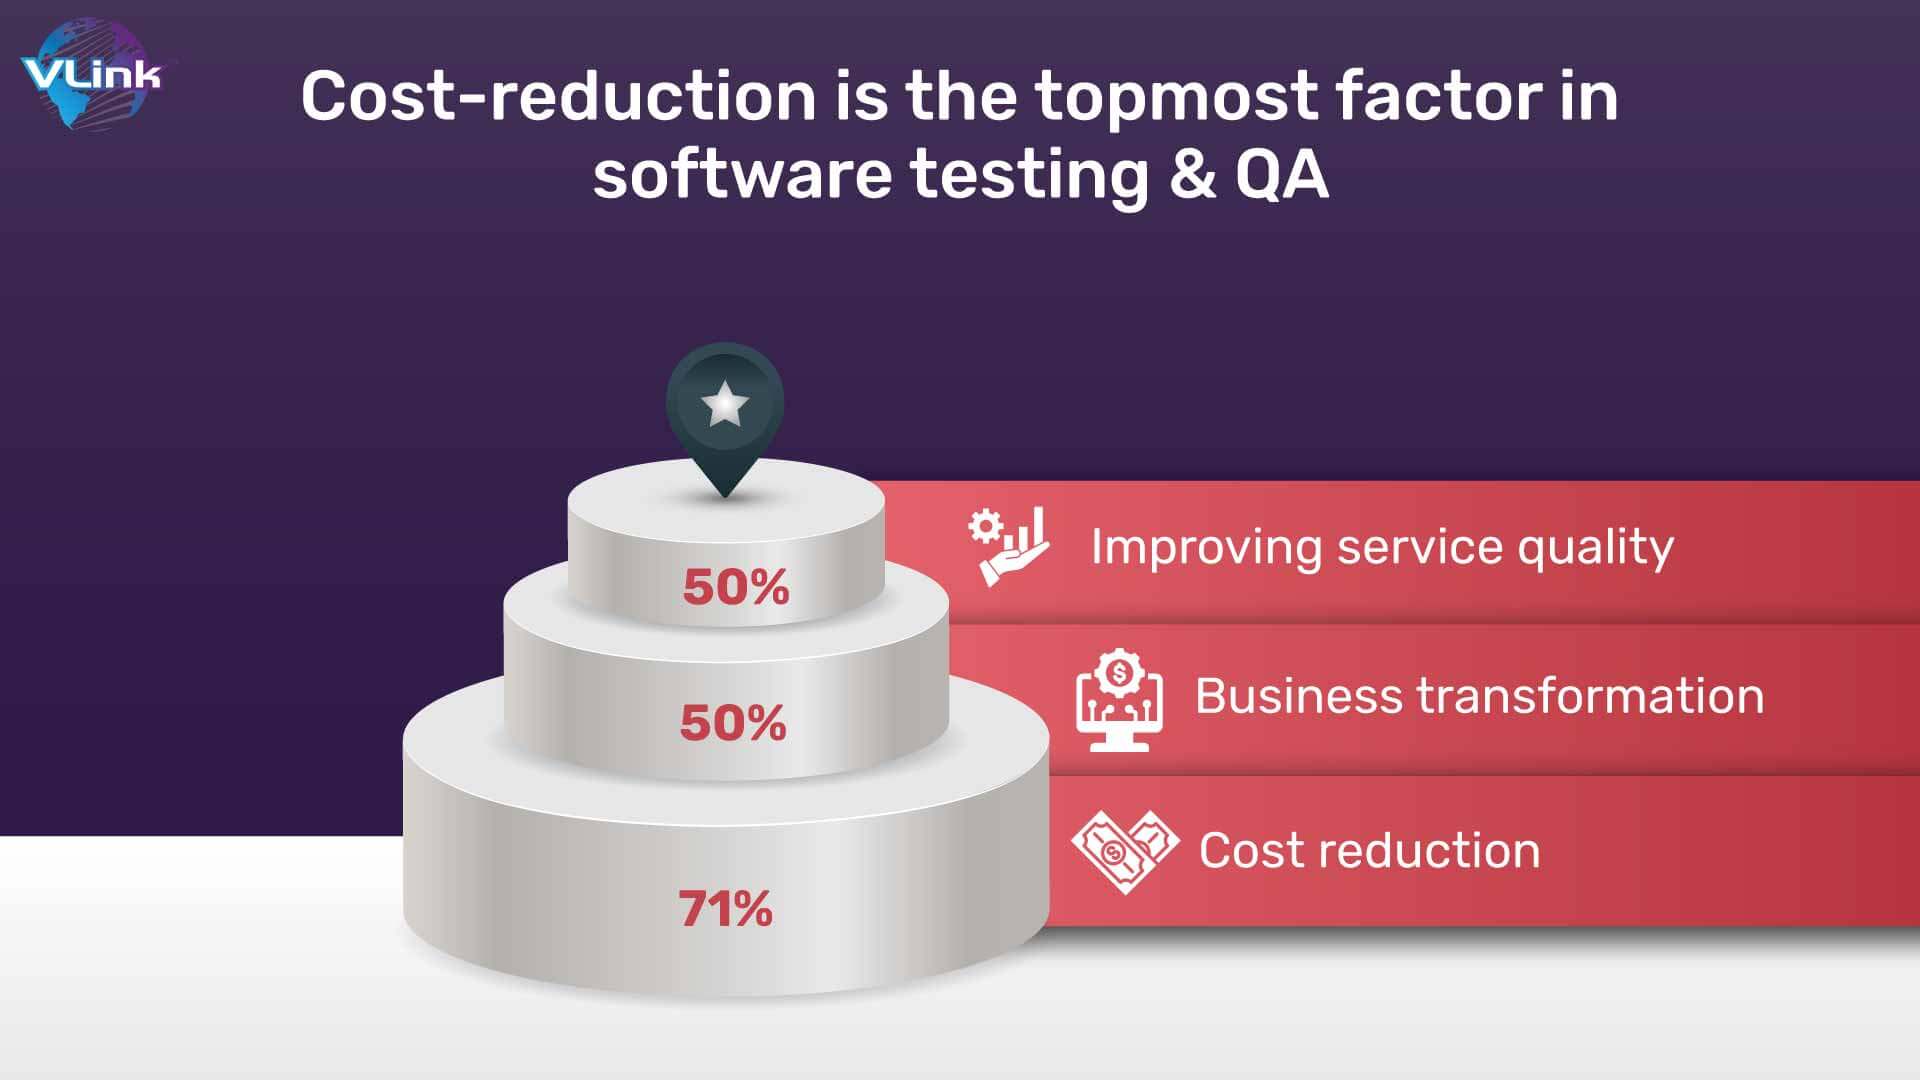 Cost-reduction is the topmost factor in software testing & QA